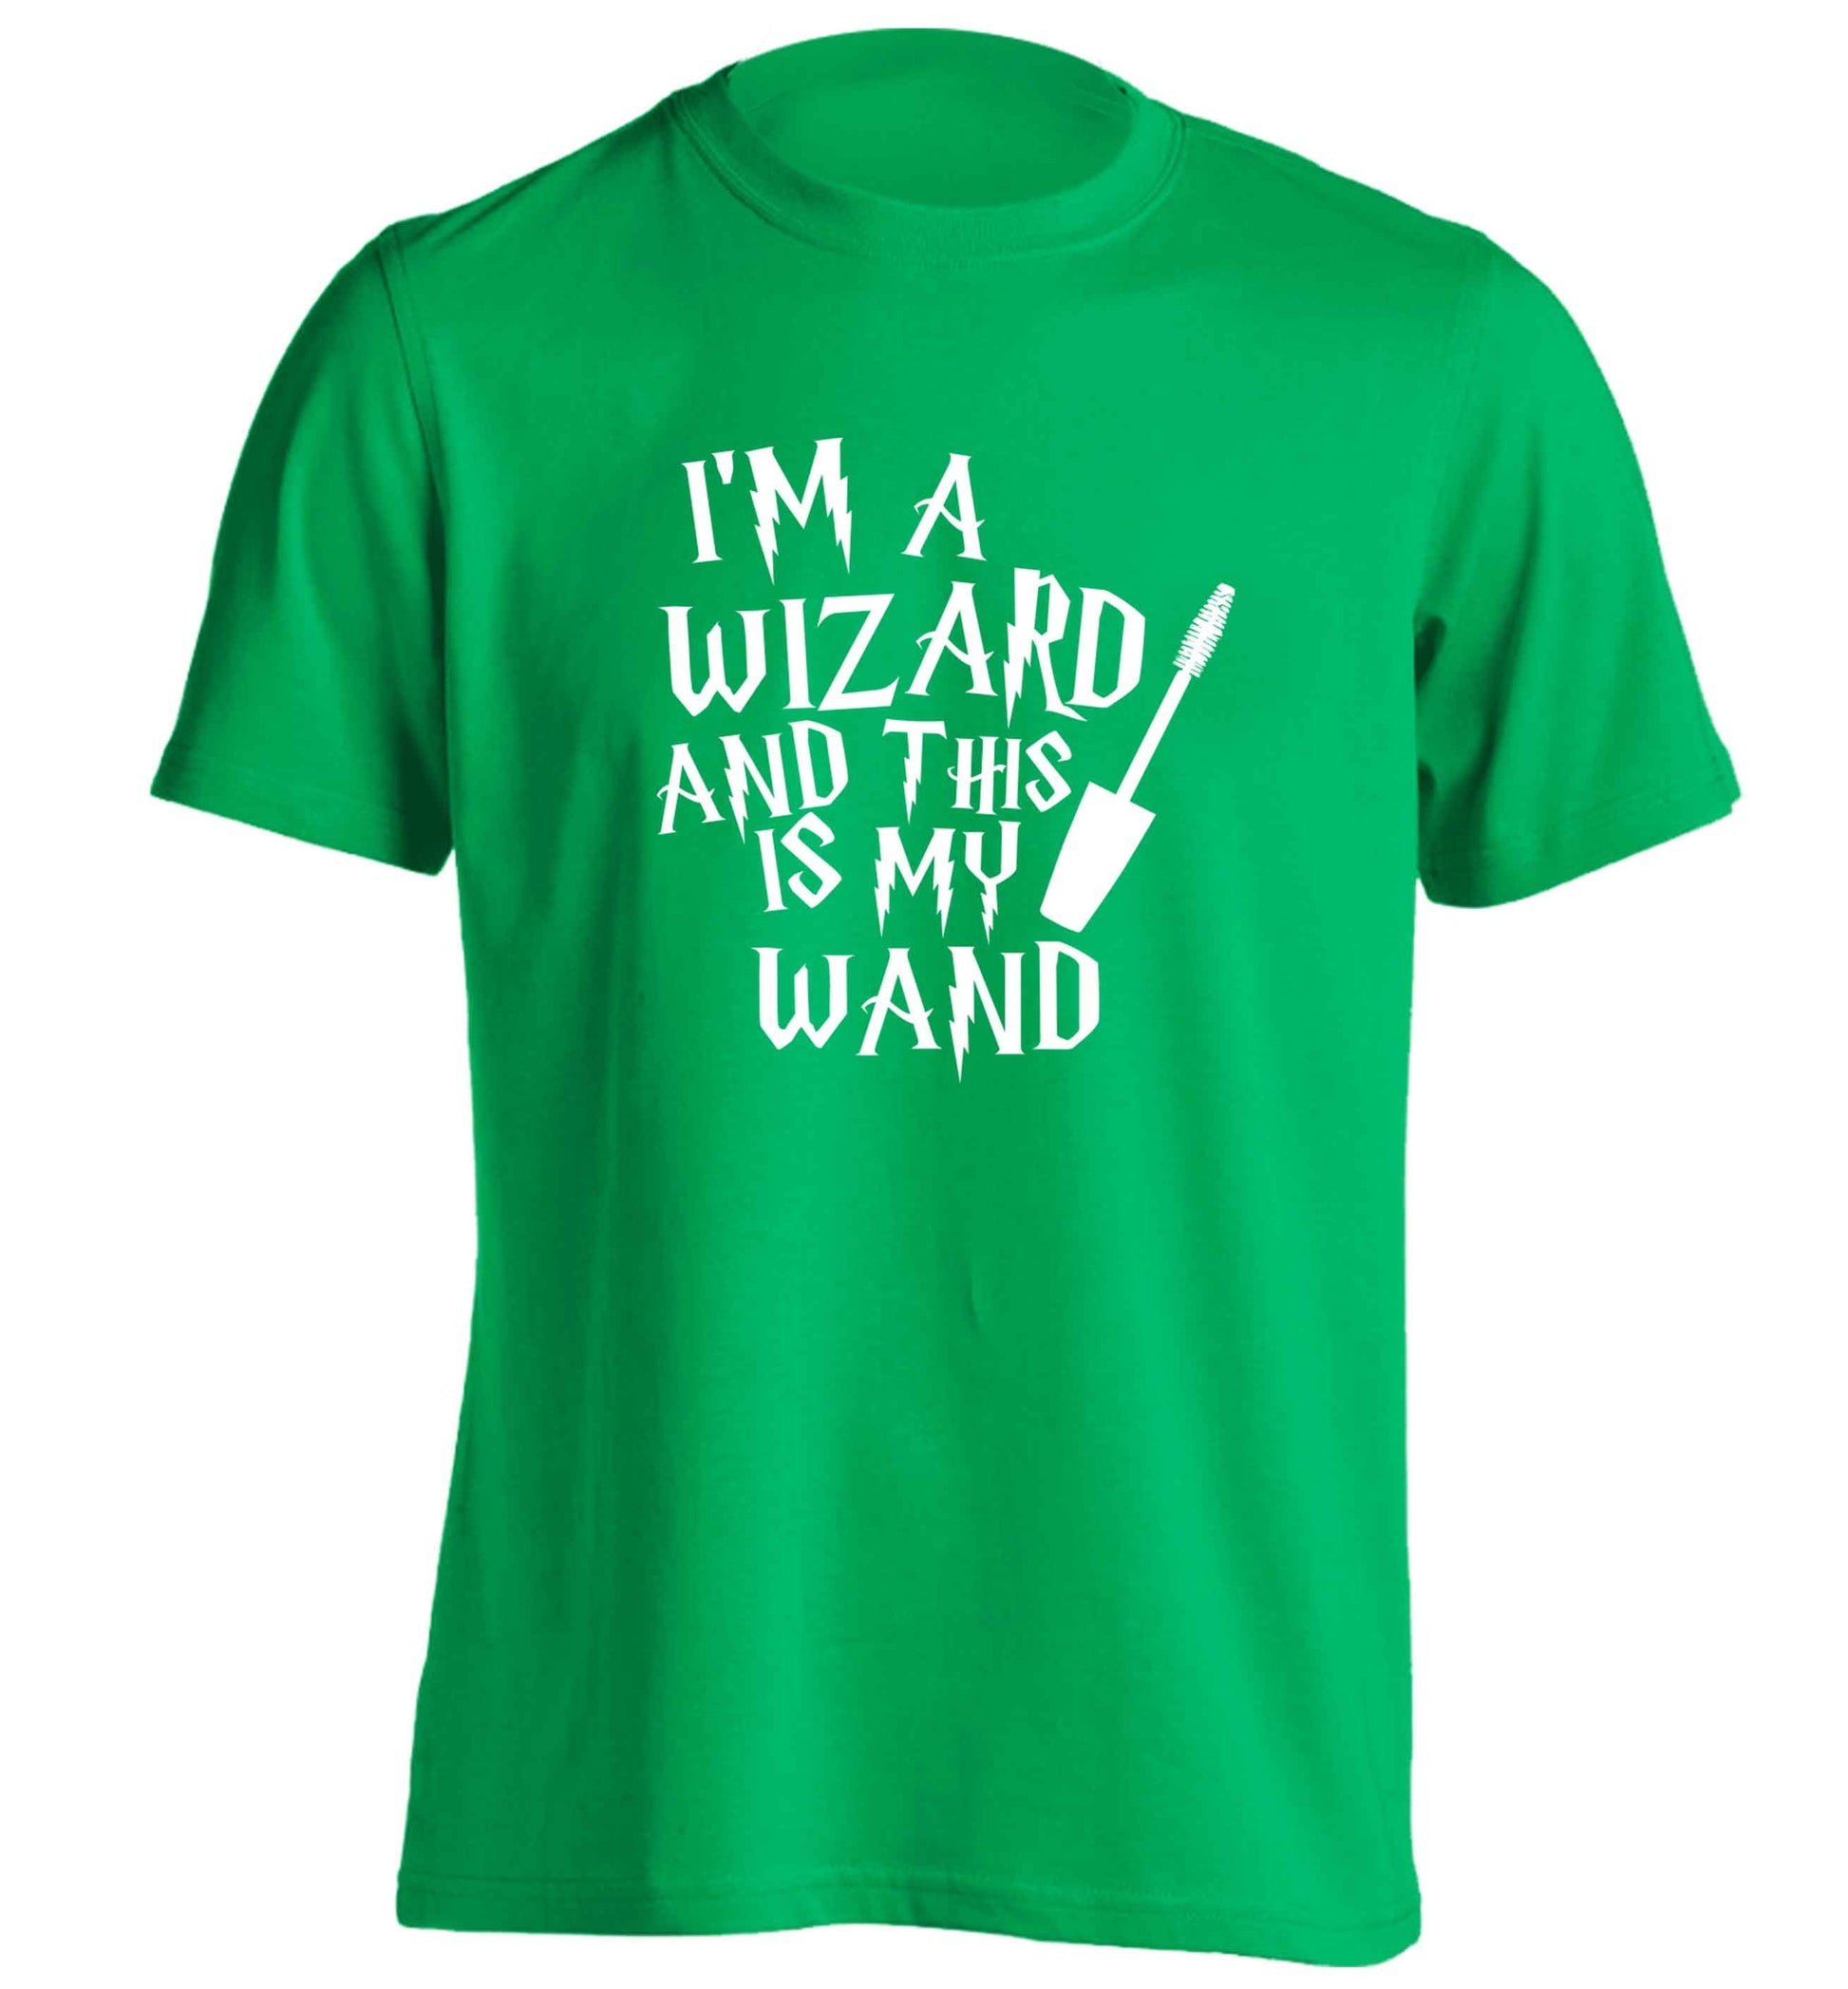 I'm a wizard and this is my wand adults unisex green Tshirt 2XL